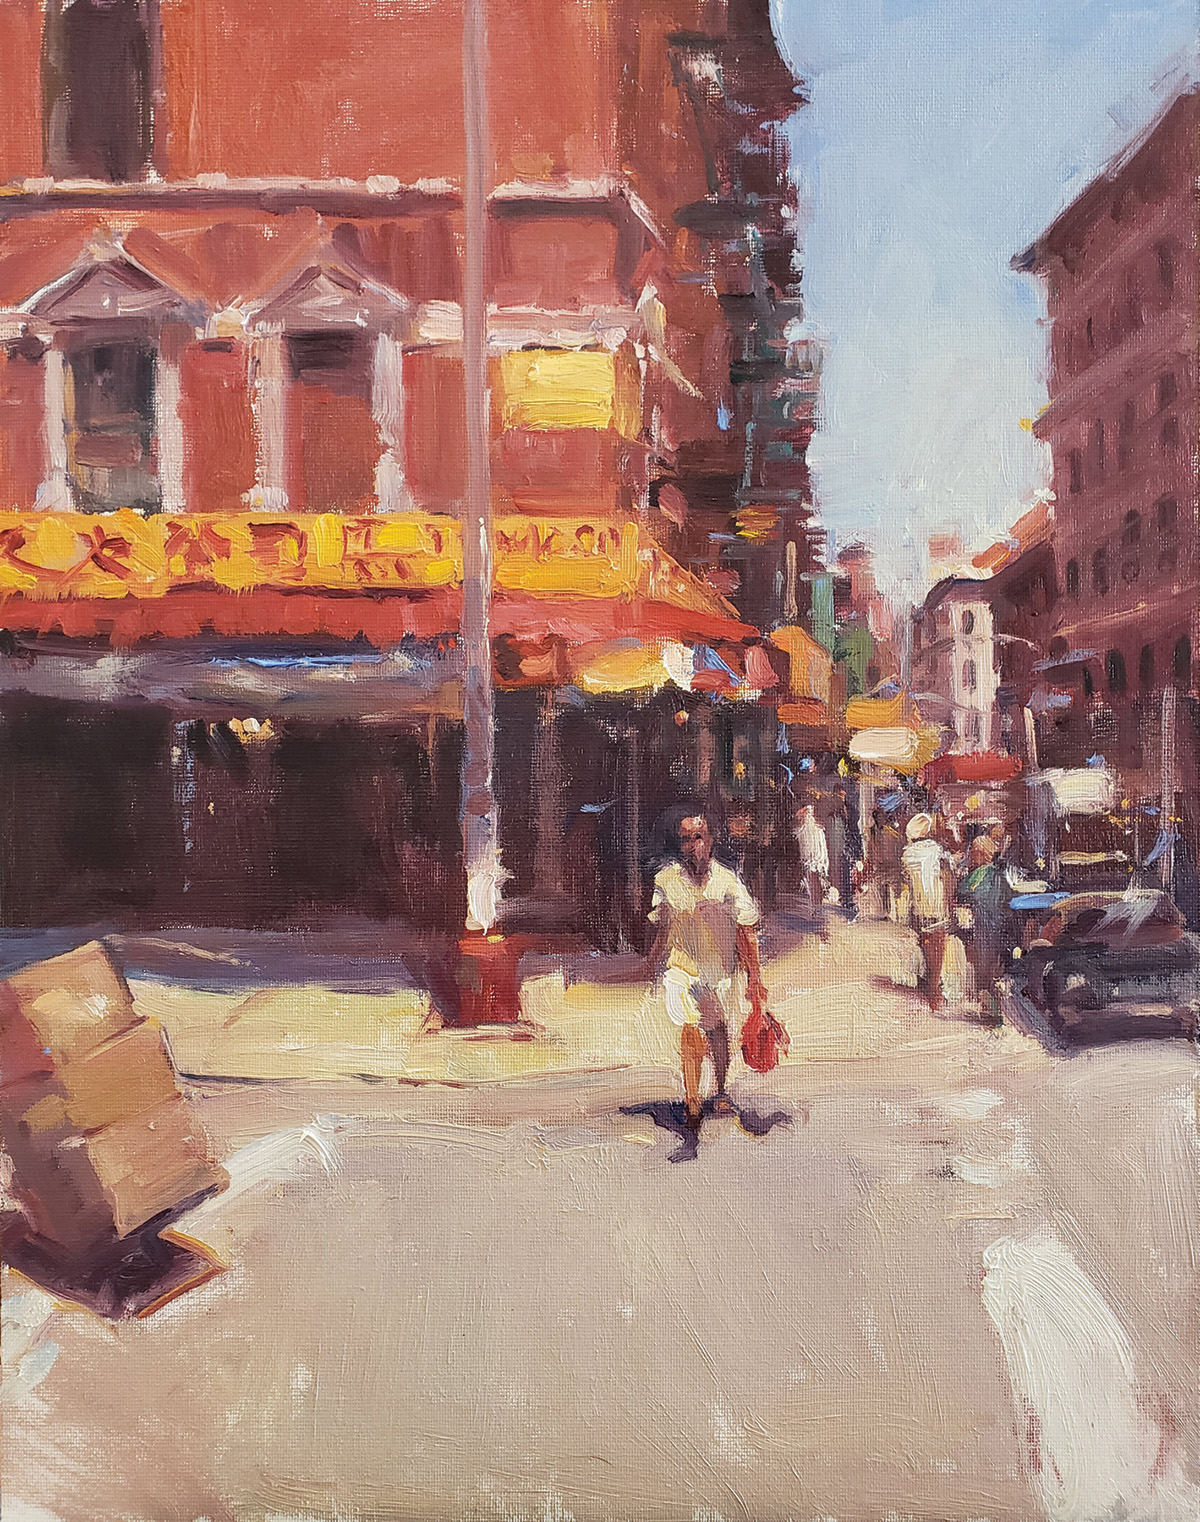 oil painting of street corner with people walking in street, and red building on left side